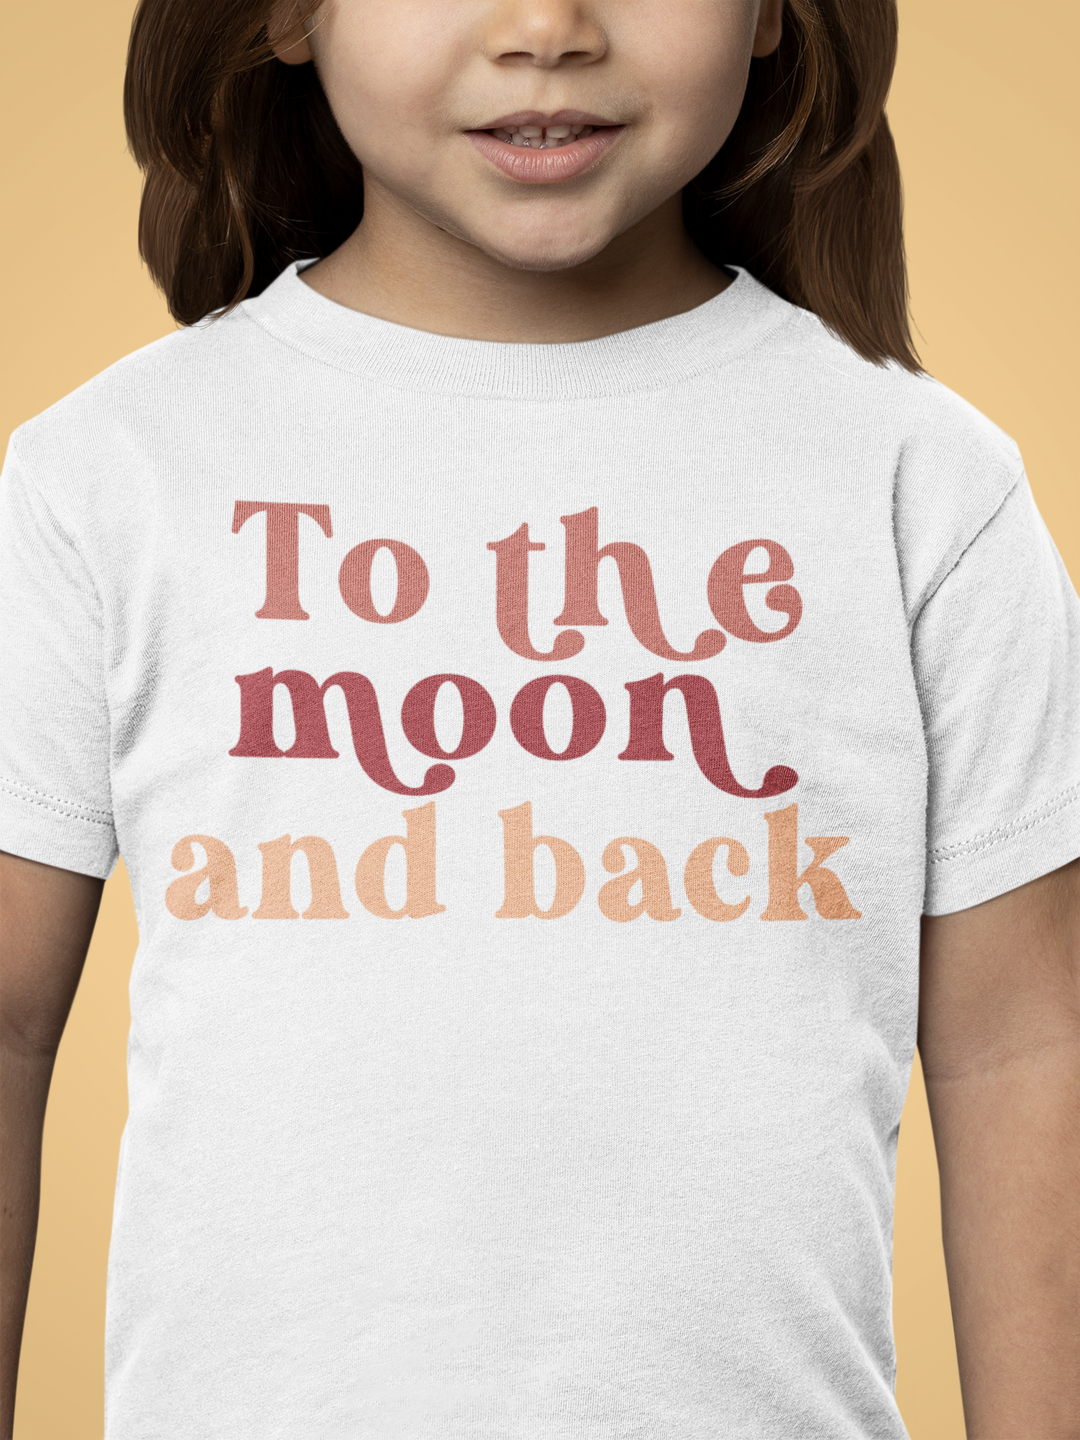 To the moon and back. T-shirt for toddlers and kids. - TeesForToddlersandKids -  t-shirt - holidays, Love - to-the-moon-and-back-toddler-short-sleeve-tee